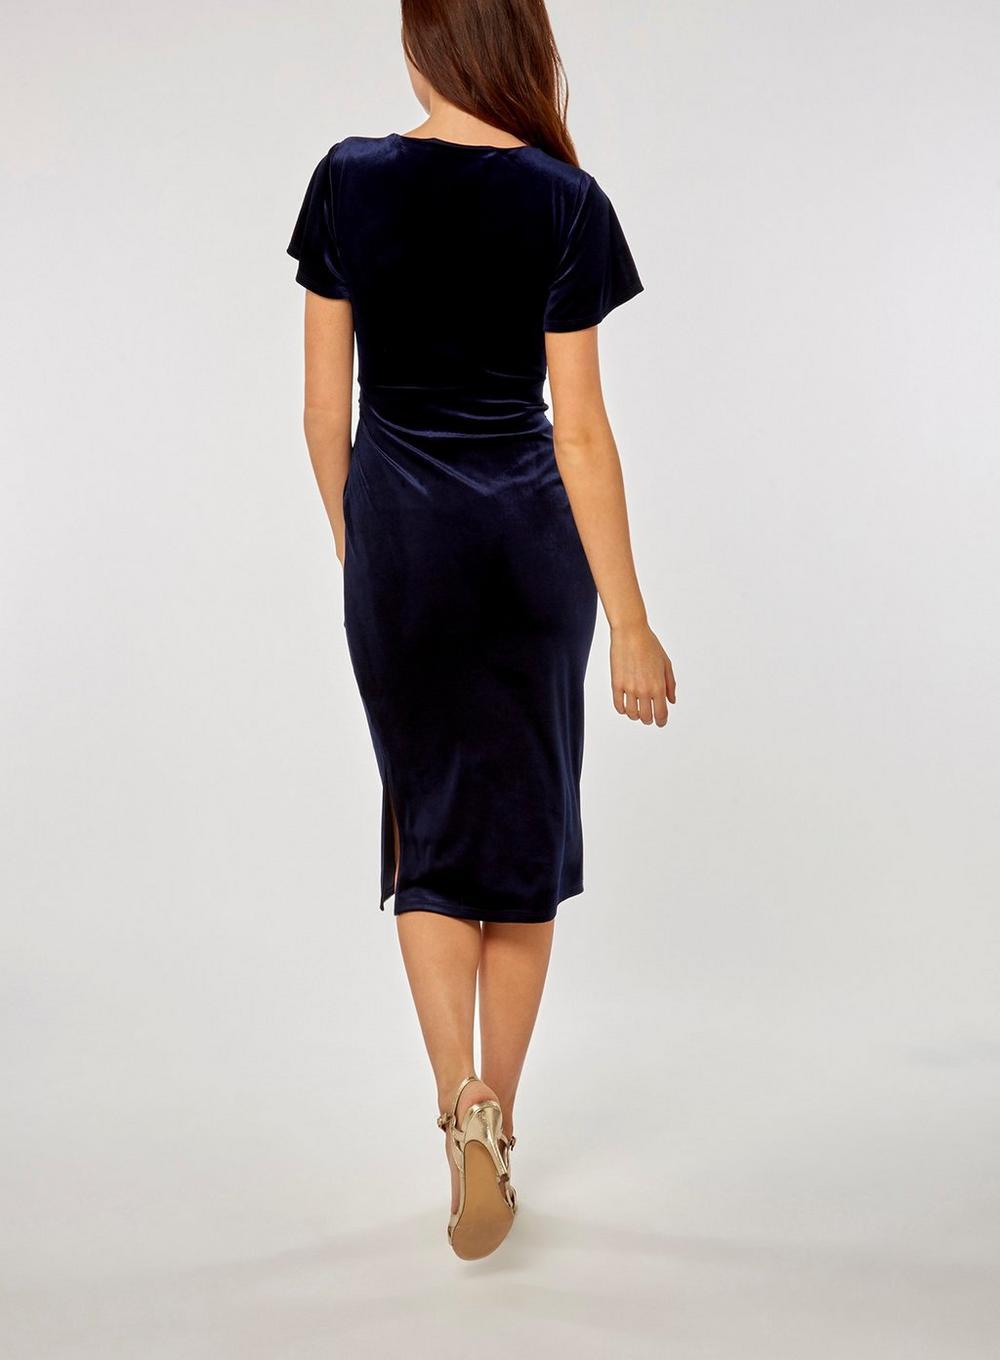 lily and franc navy dress